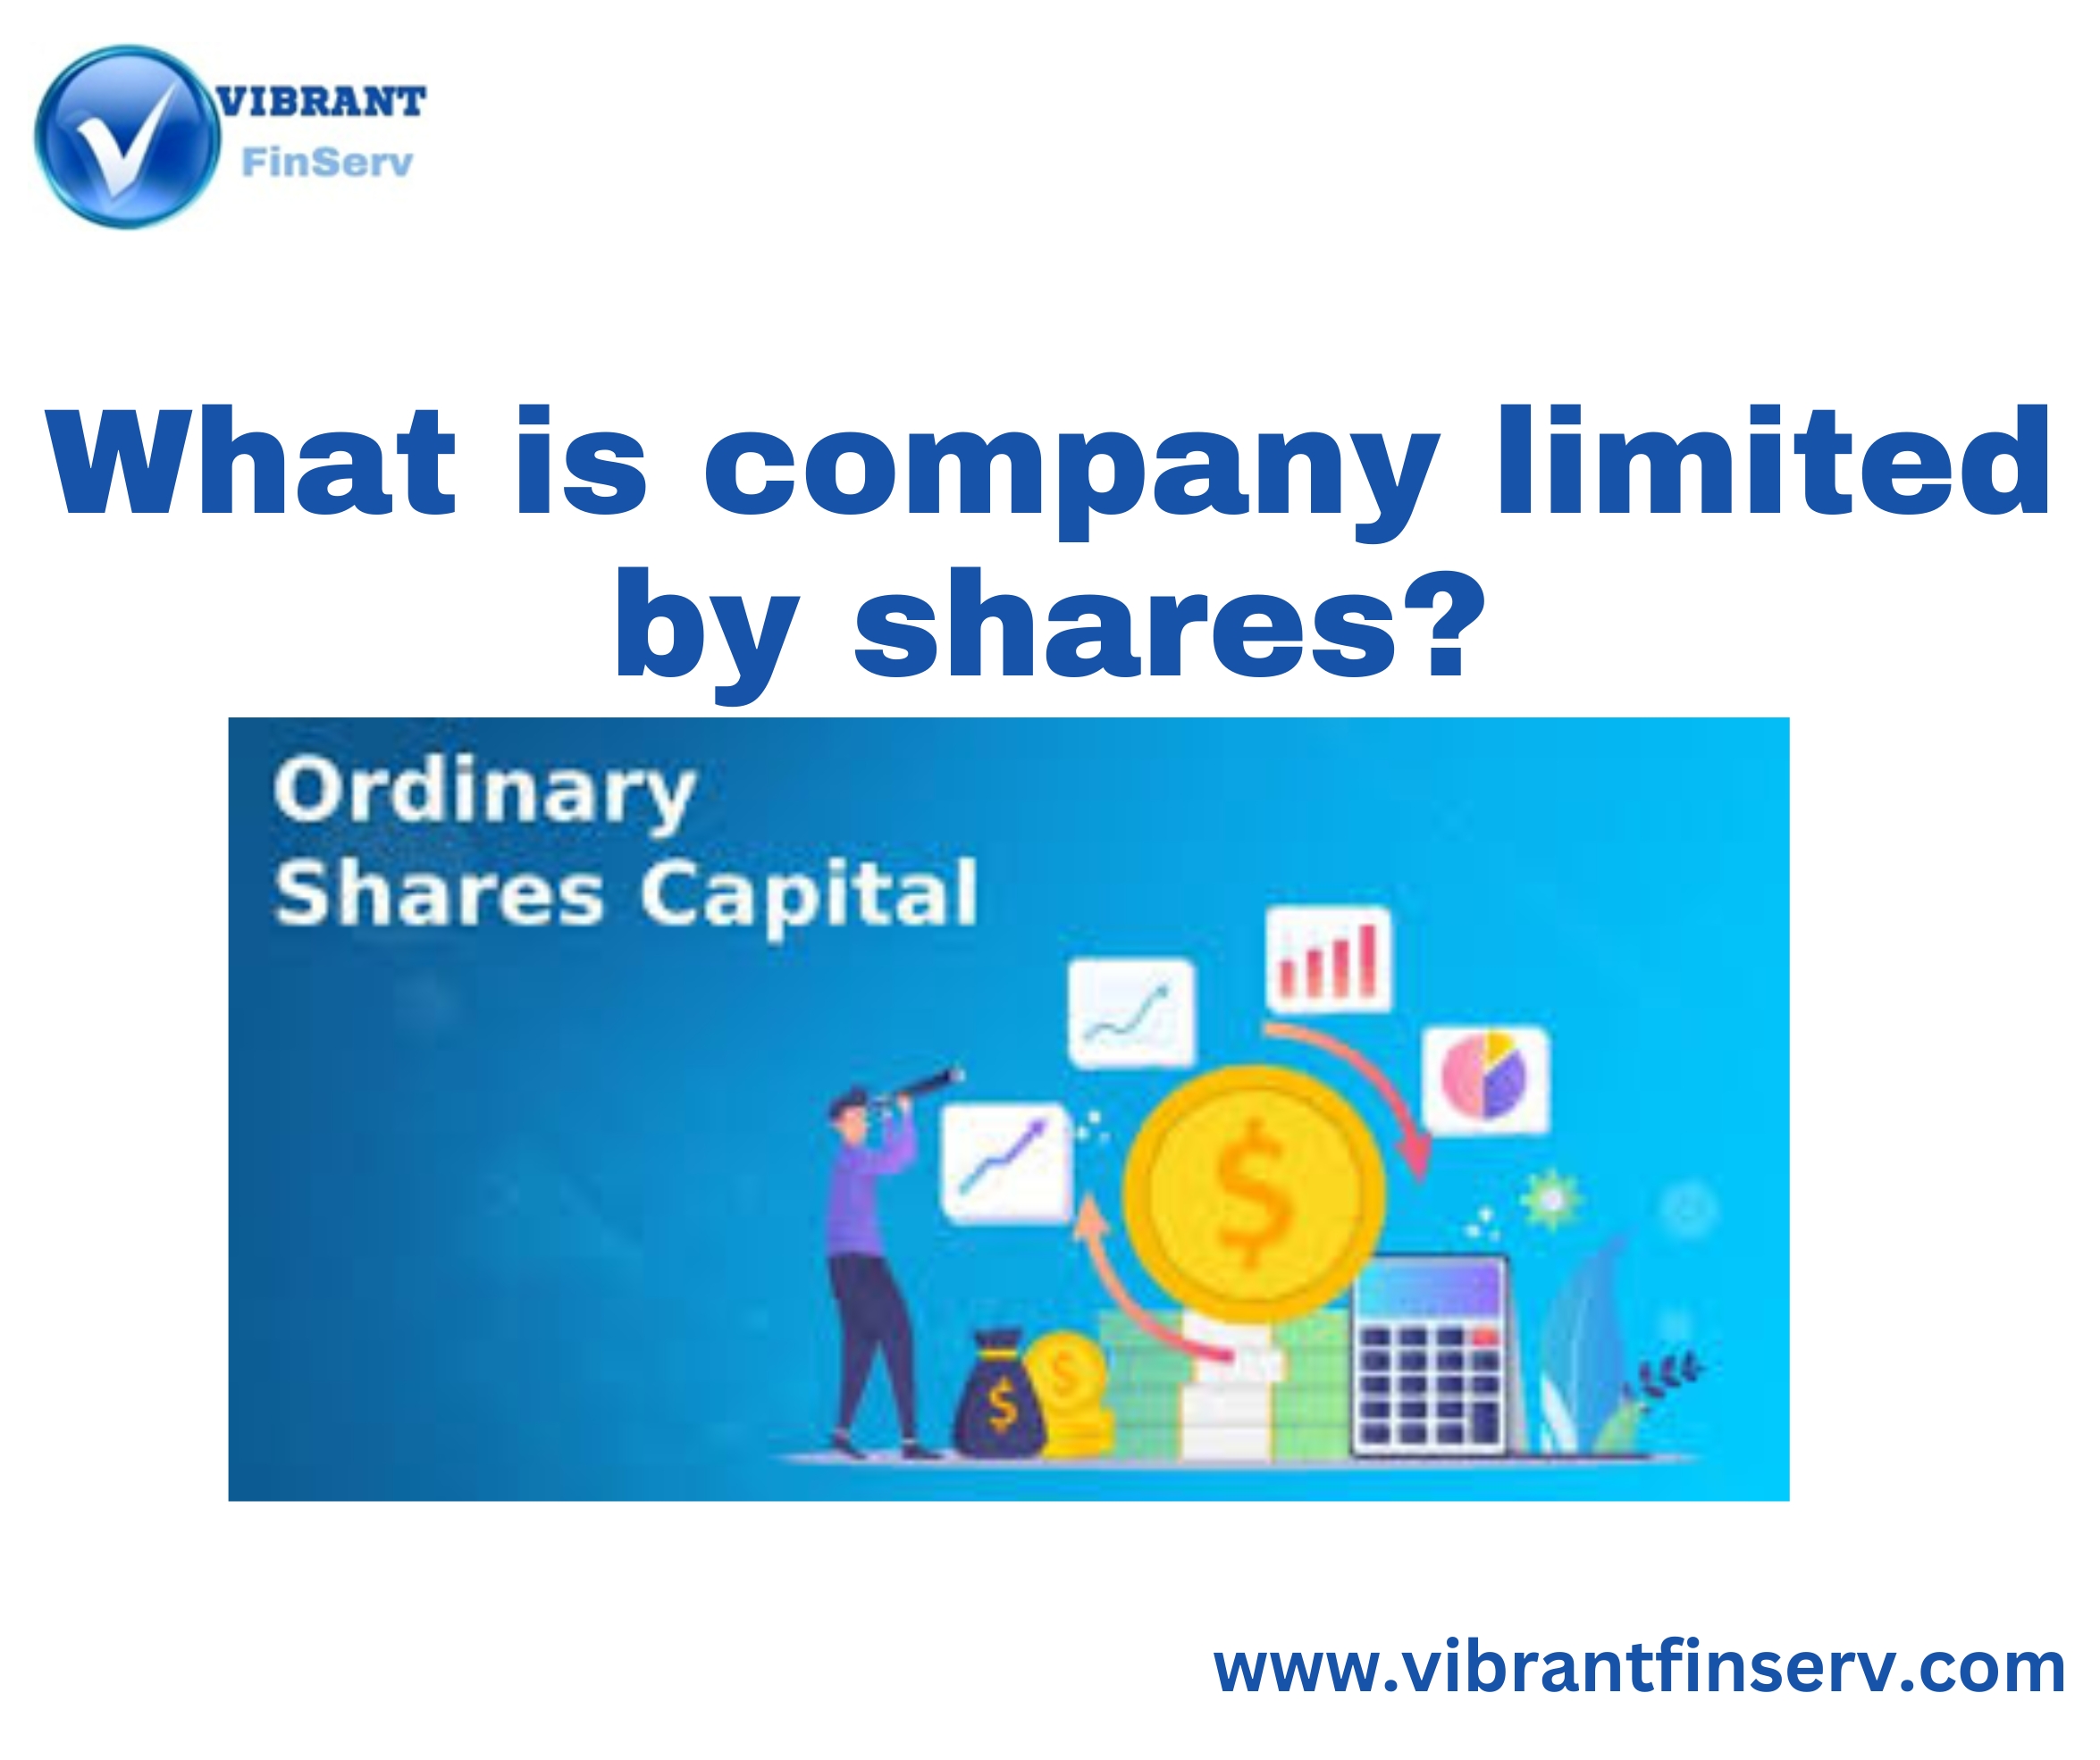 Company Limited by Shares